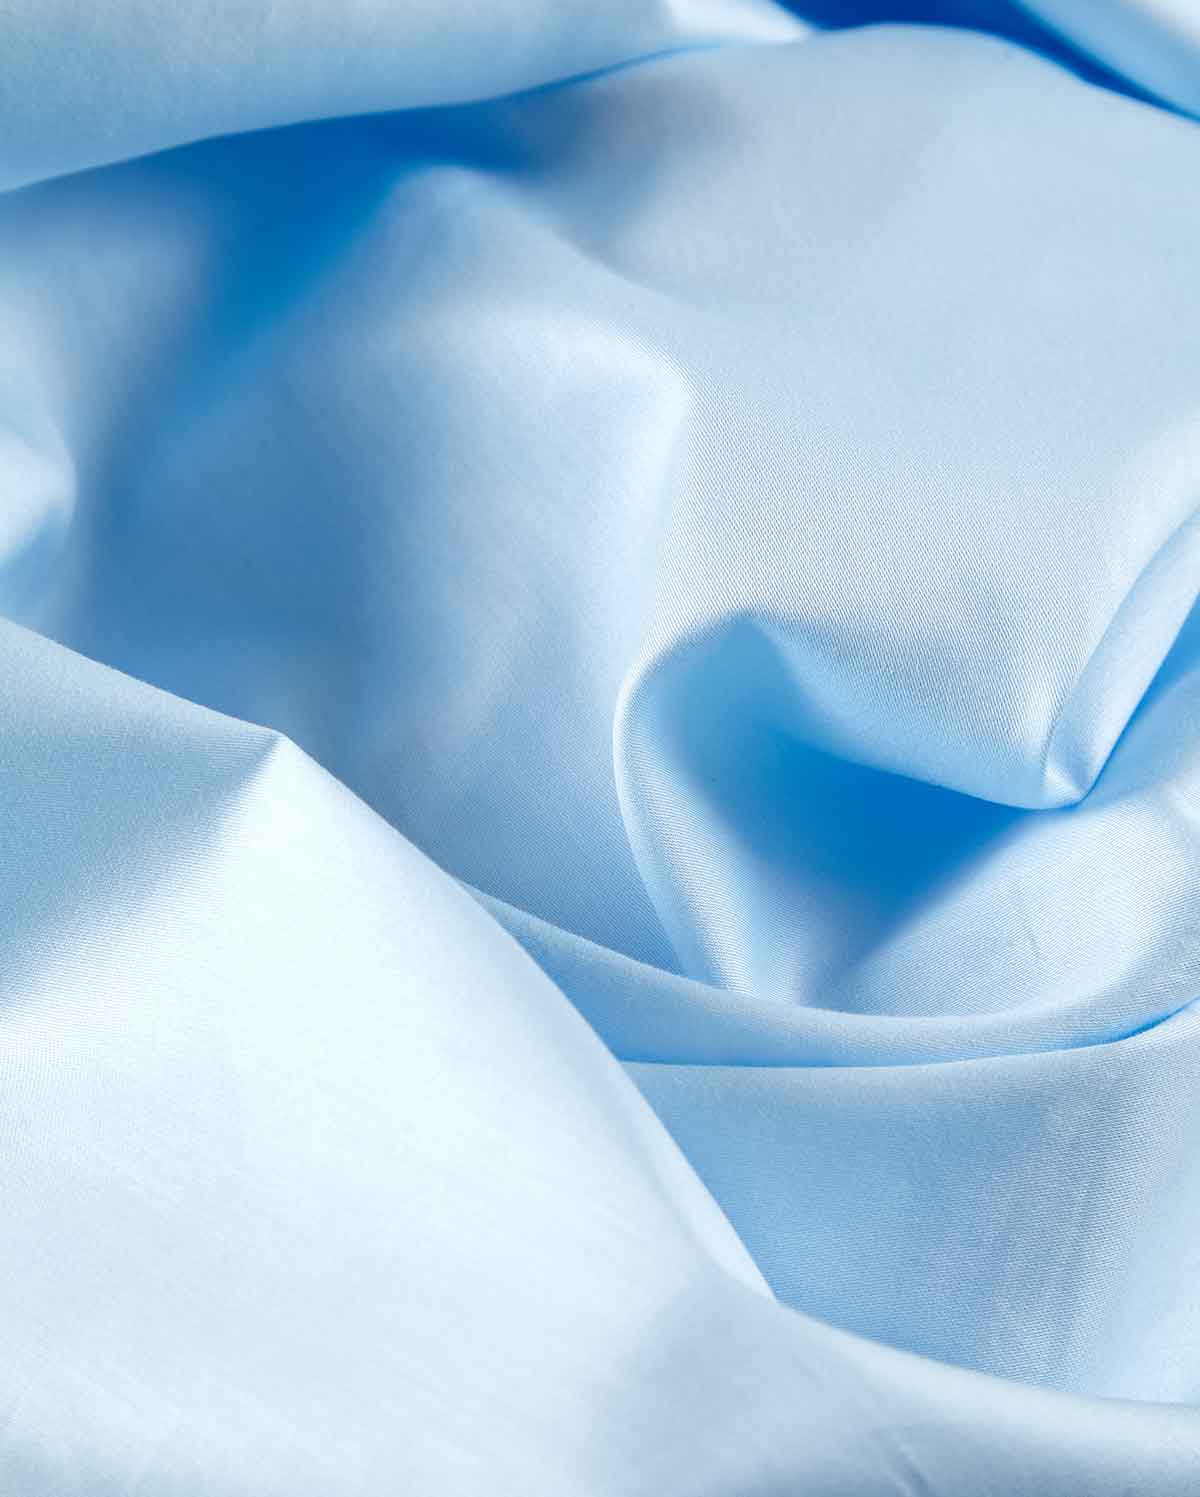 Reversible Percale Bedding Set - Blue & Baby Blue